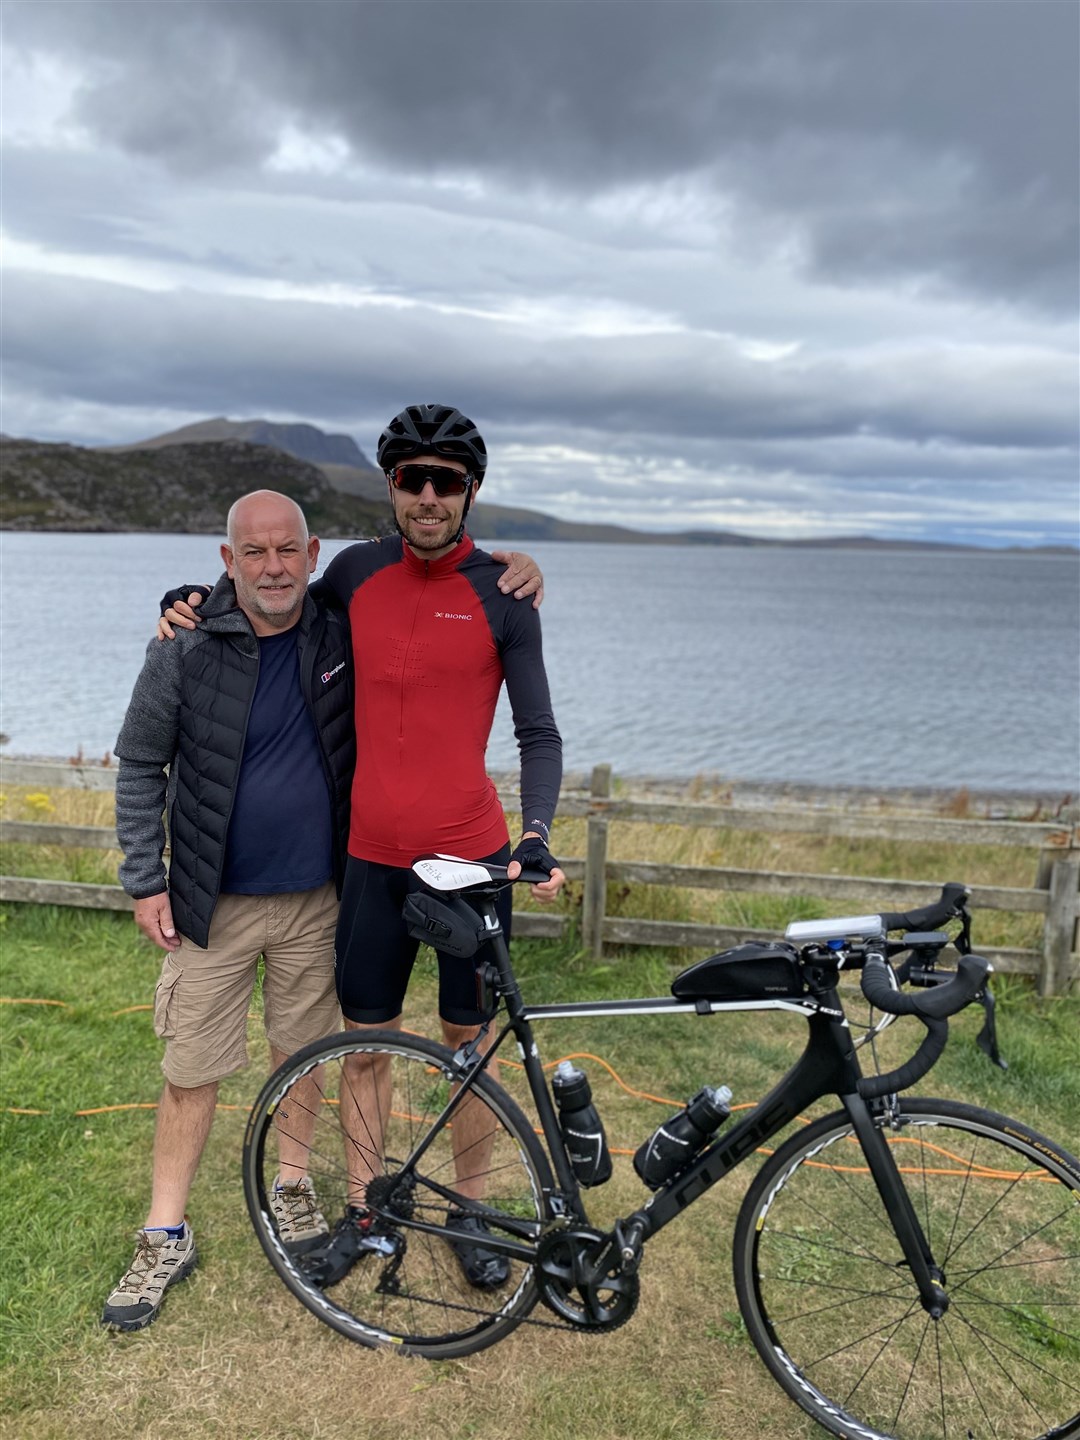 Sam and John Milton with some of the great NC500 scenery in the background.